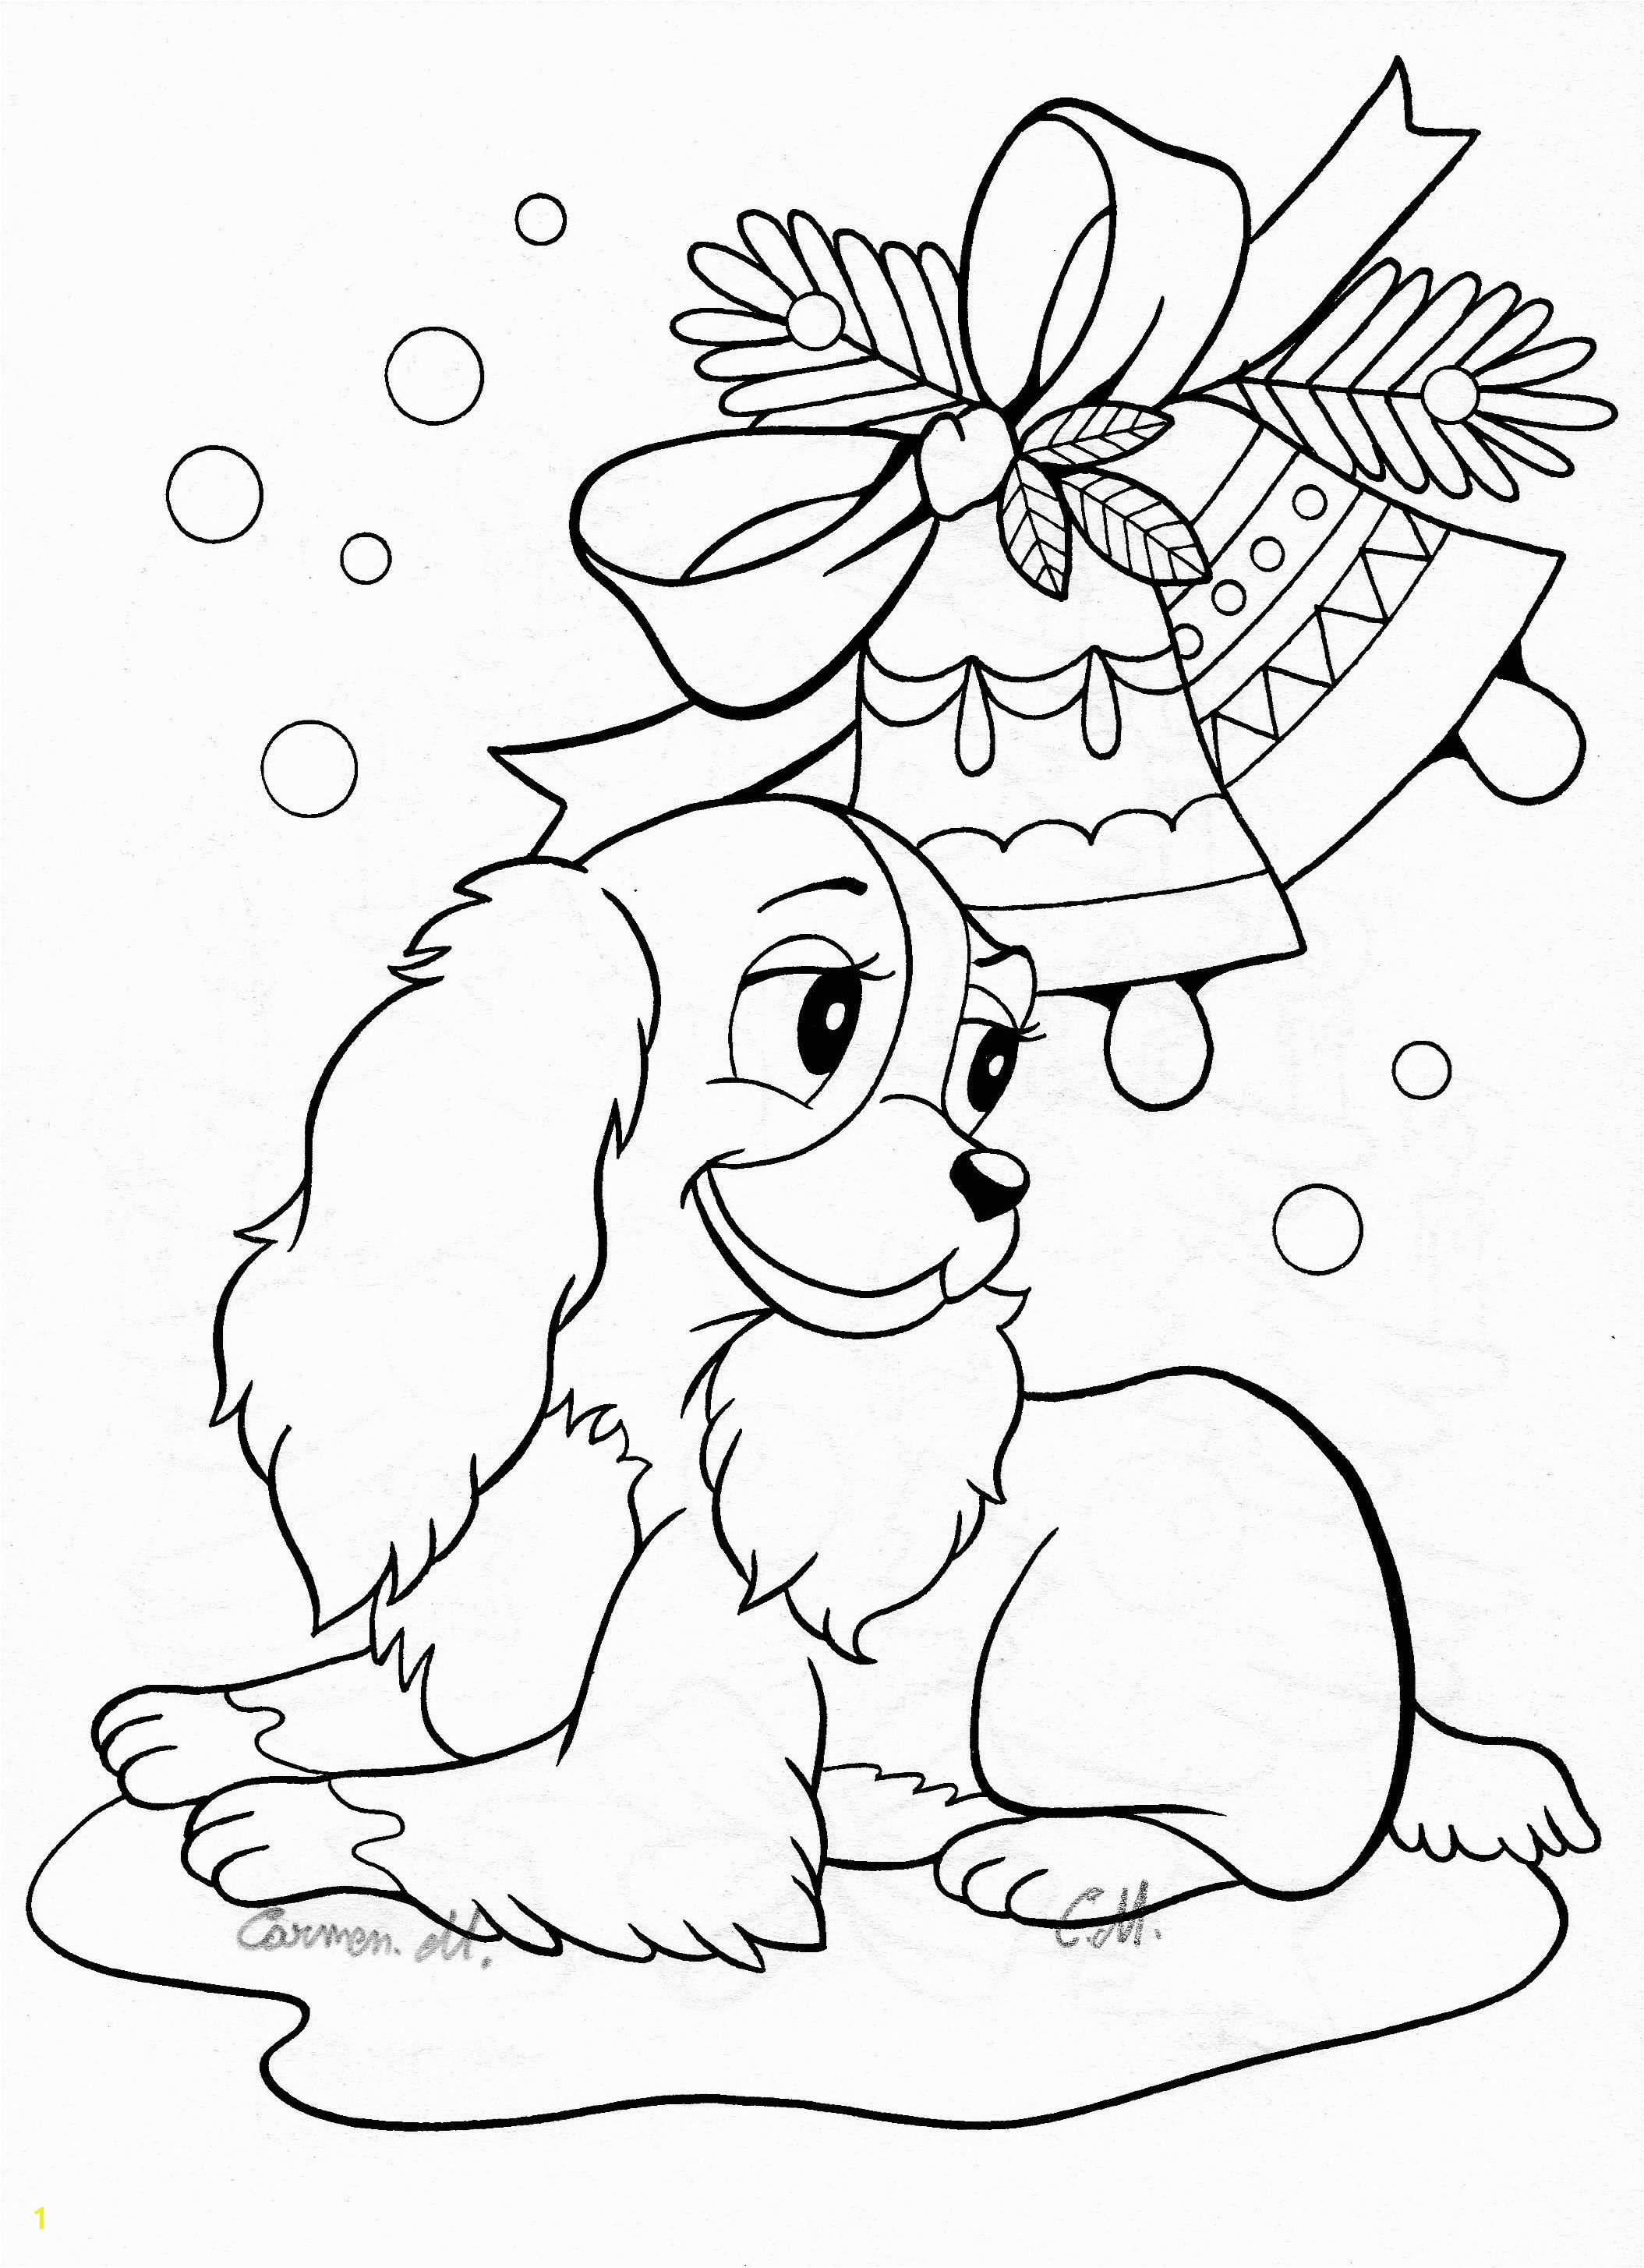 Printable Od Dog Coloring Pages Free Colouring Pages Dinosaur Coloring Pages